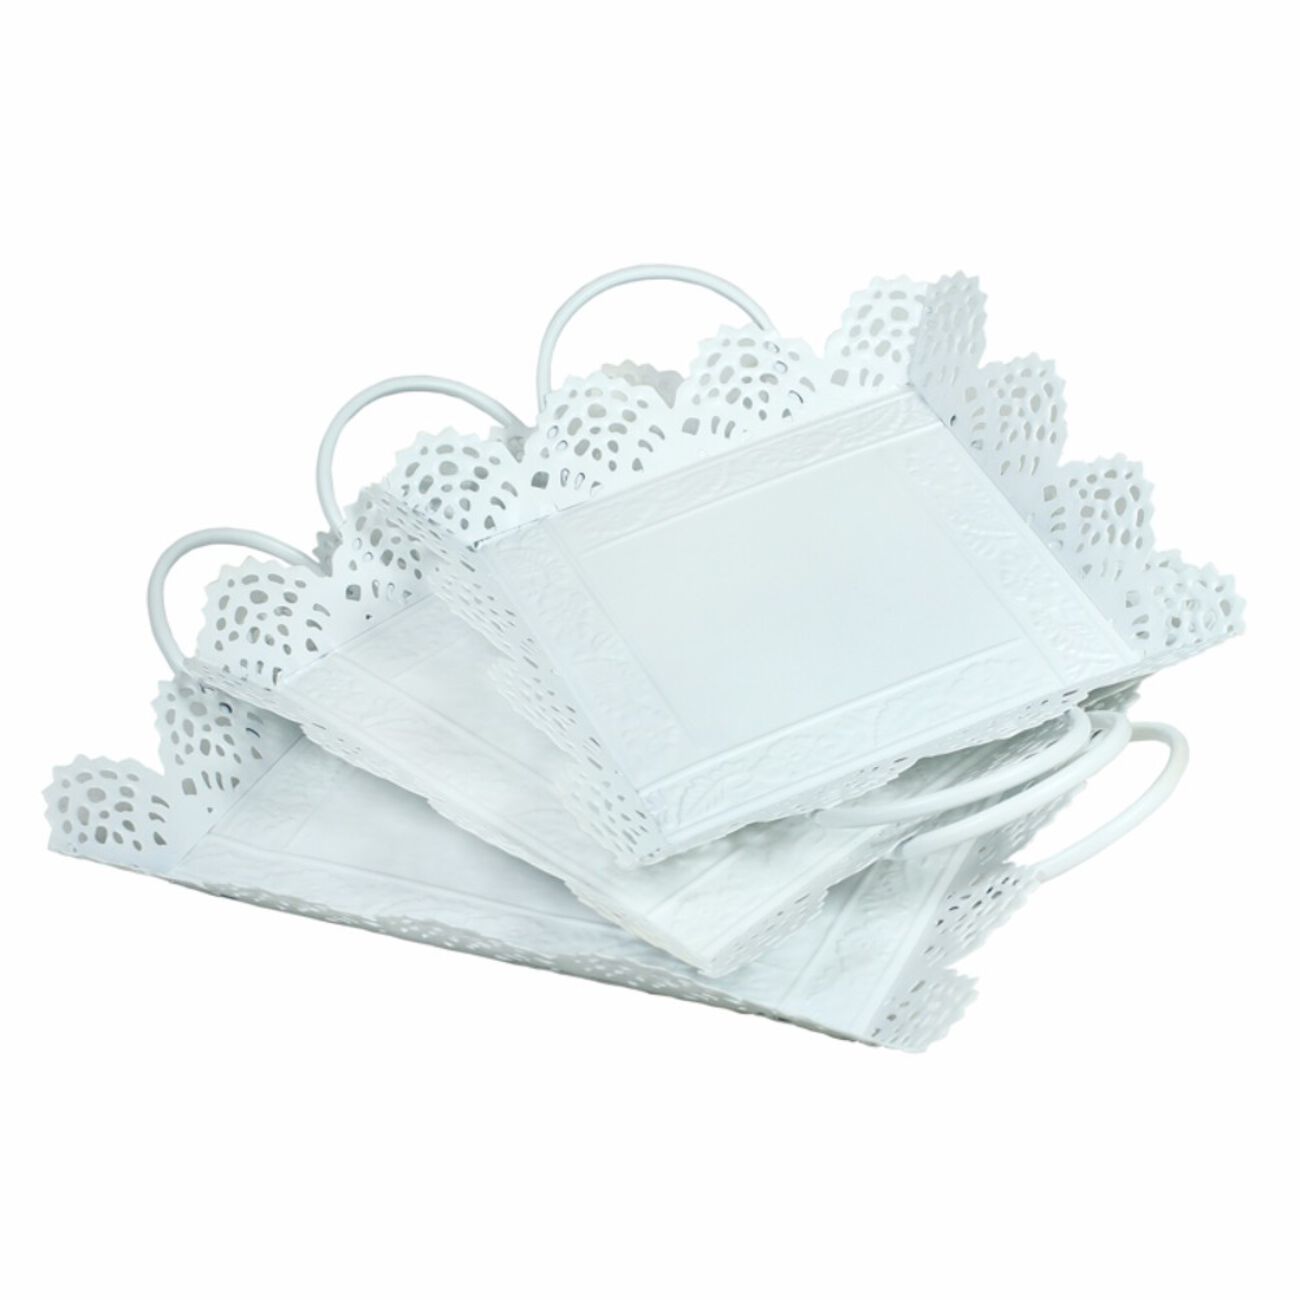 Metal Tray With Cutout Design, Set Of 3, White